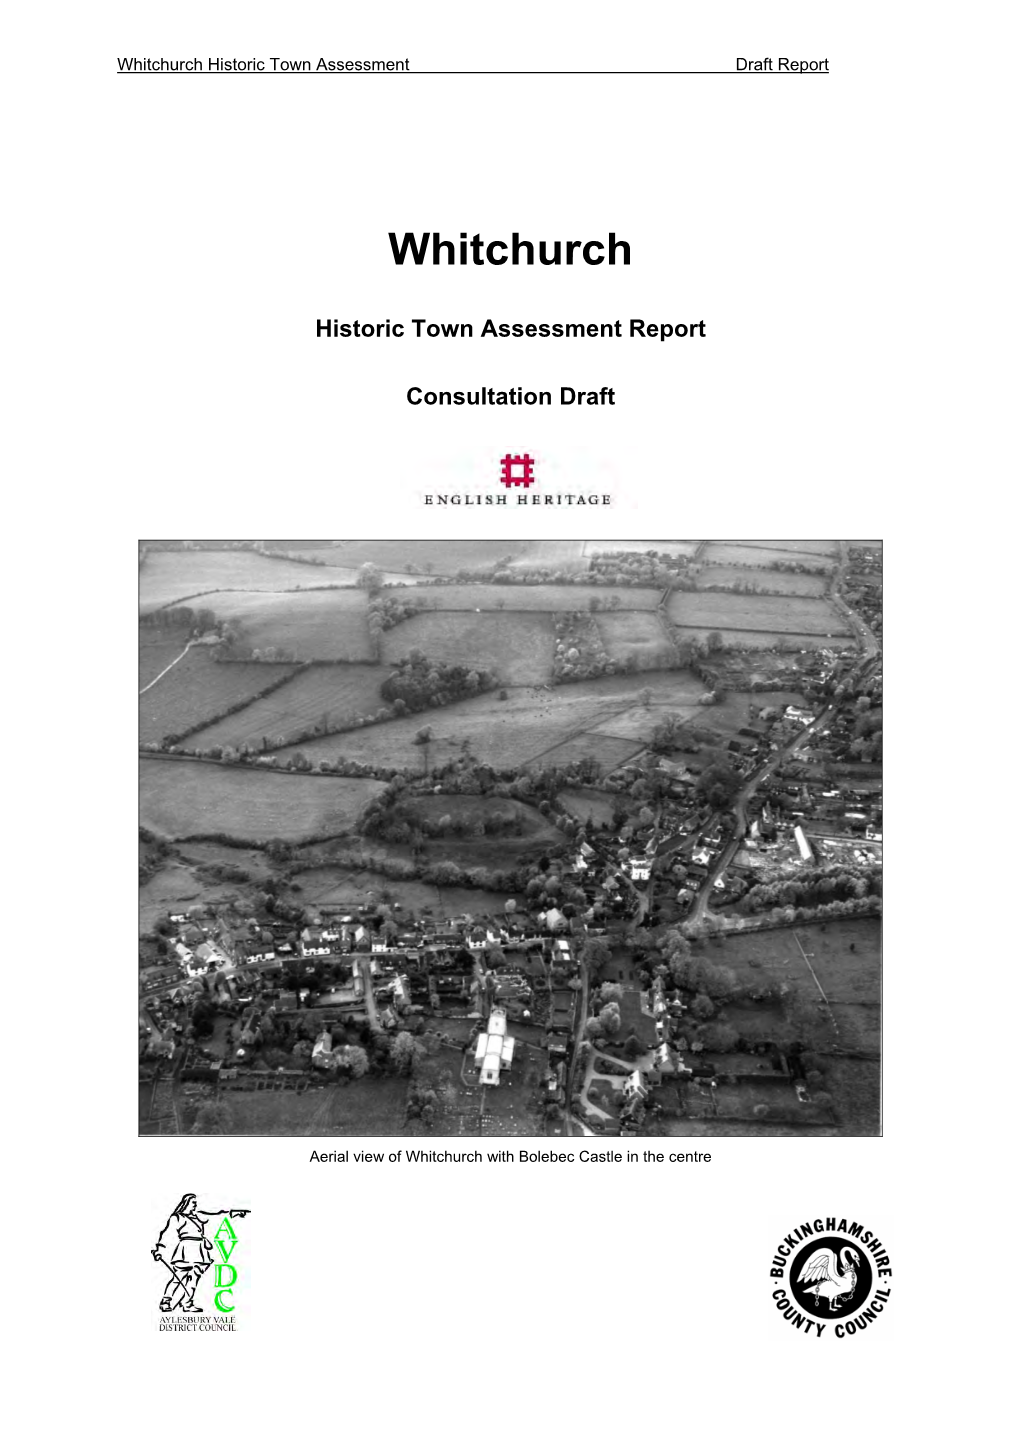 Whitchurch Historic Town Assessment Report